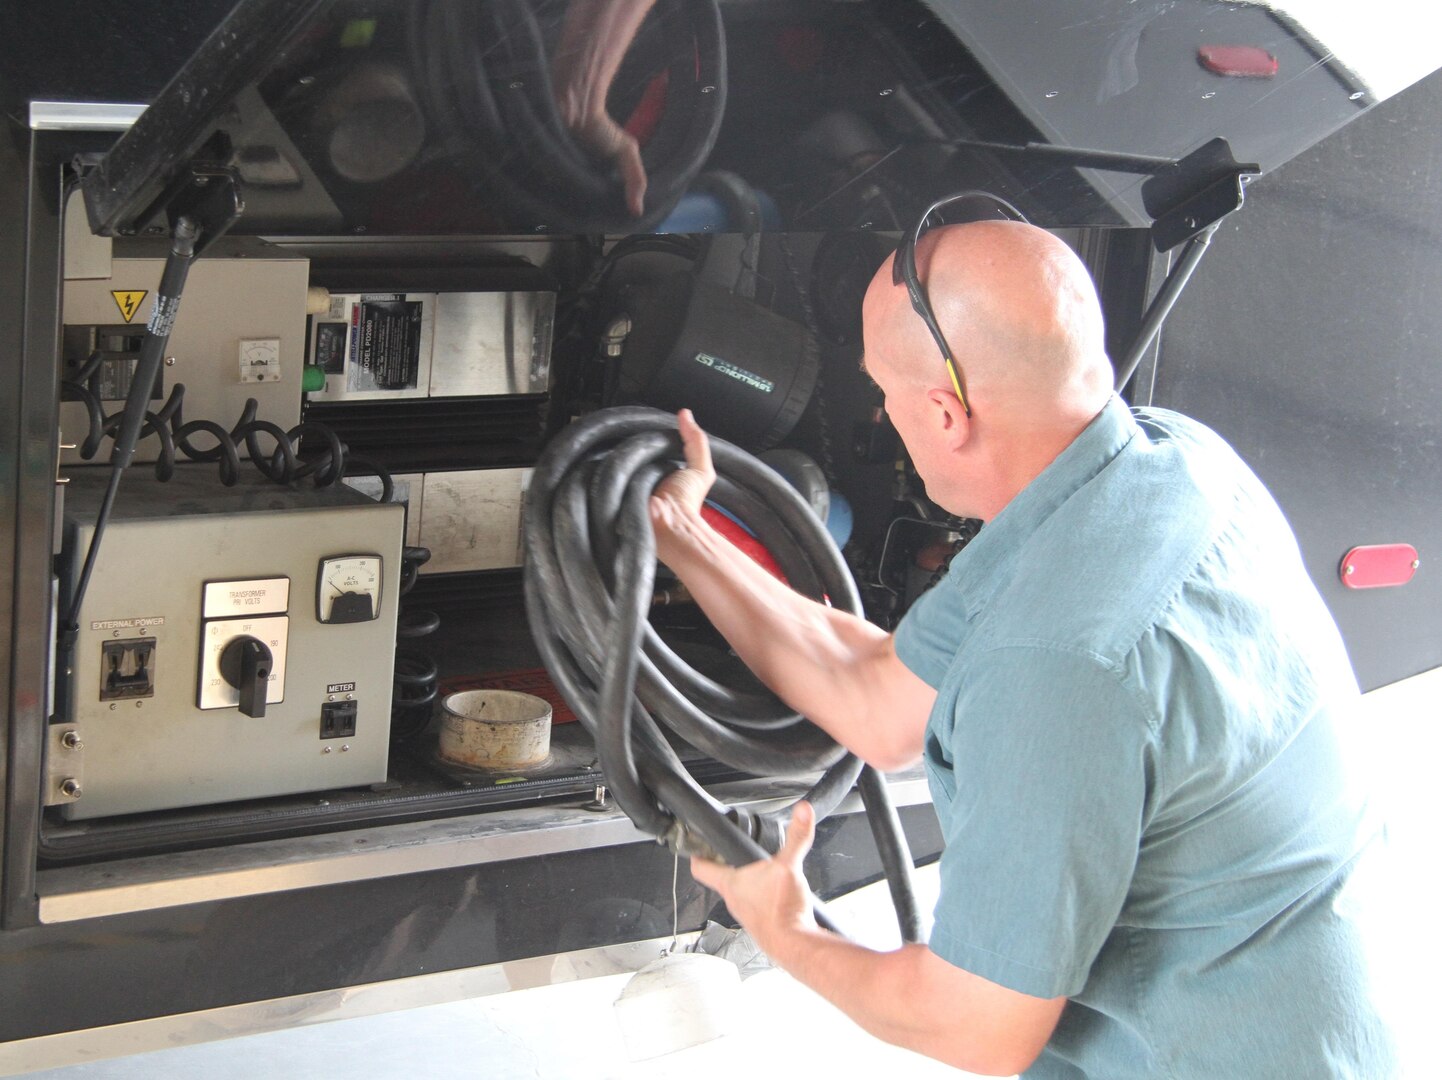 Matt Hopper, a telecommunications specialist for Task Force 51, Army North (Fifth Army), Joint Base San Antonio-Fort Sam Houston, conducts a vehicle inspection Aug. 28 of the sentinel mobile communication platform in preparation to provide support to civil authority in Houston from the aftermath of Hurricane Harvey. The sentinel can push information to customers within 15 to 30 minutes of arrival and fully set up within a few hours. TF-51 is deploying to Kelly Annex next to JBSA-Lackland to provide command and control over Title 10 assets, which will also provide support to civil authority. The mission of TF-51 is Army North’s contingency command post to conduct support for Defense Support of Civil Authority, or DSCA, homeland defense and theater security cooperation in order to promote the defense and security of the United States.